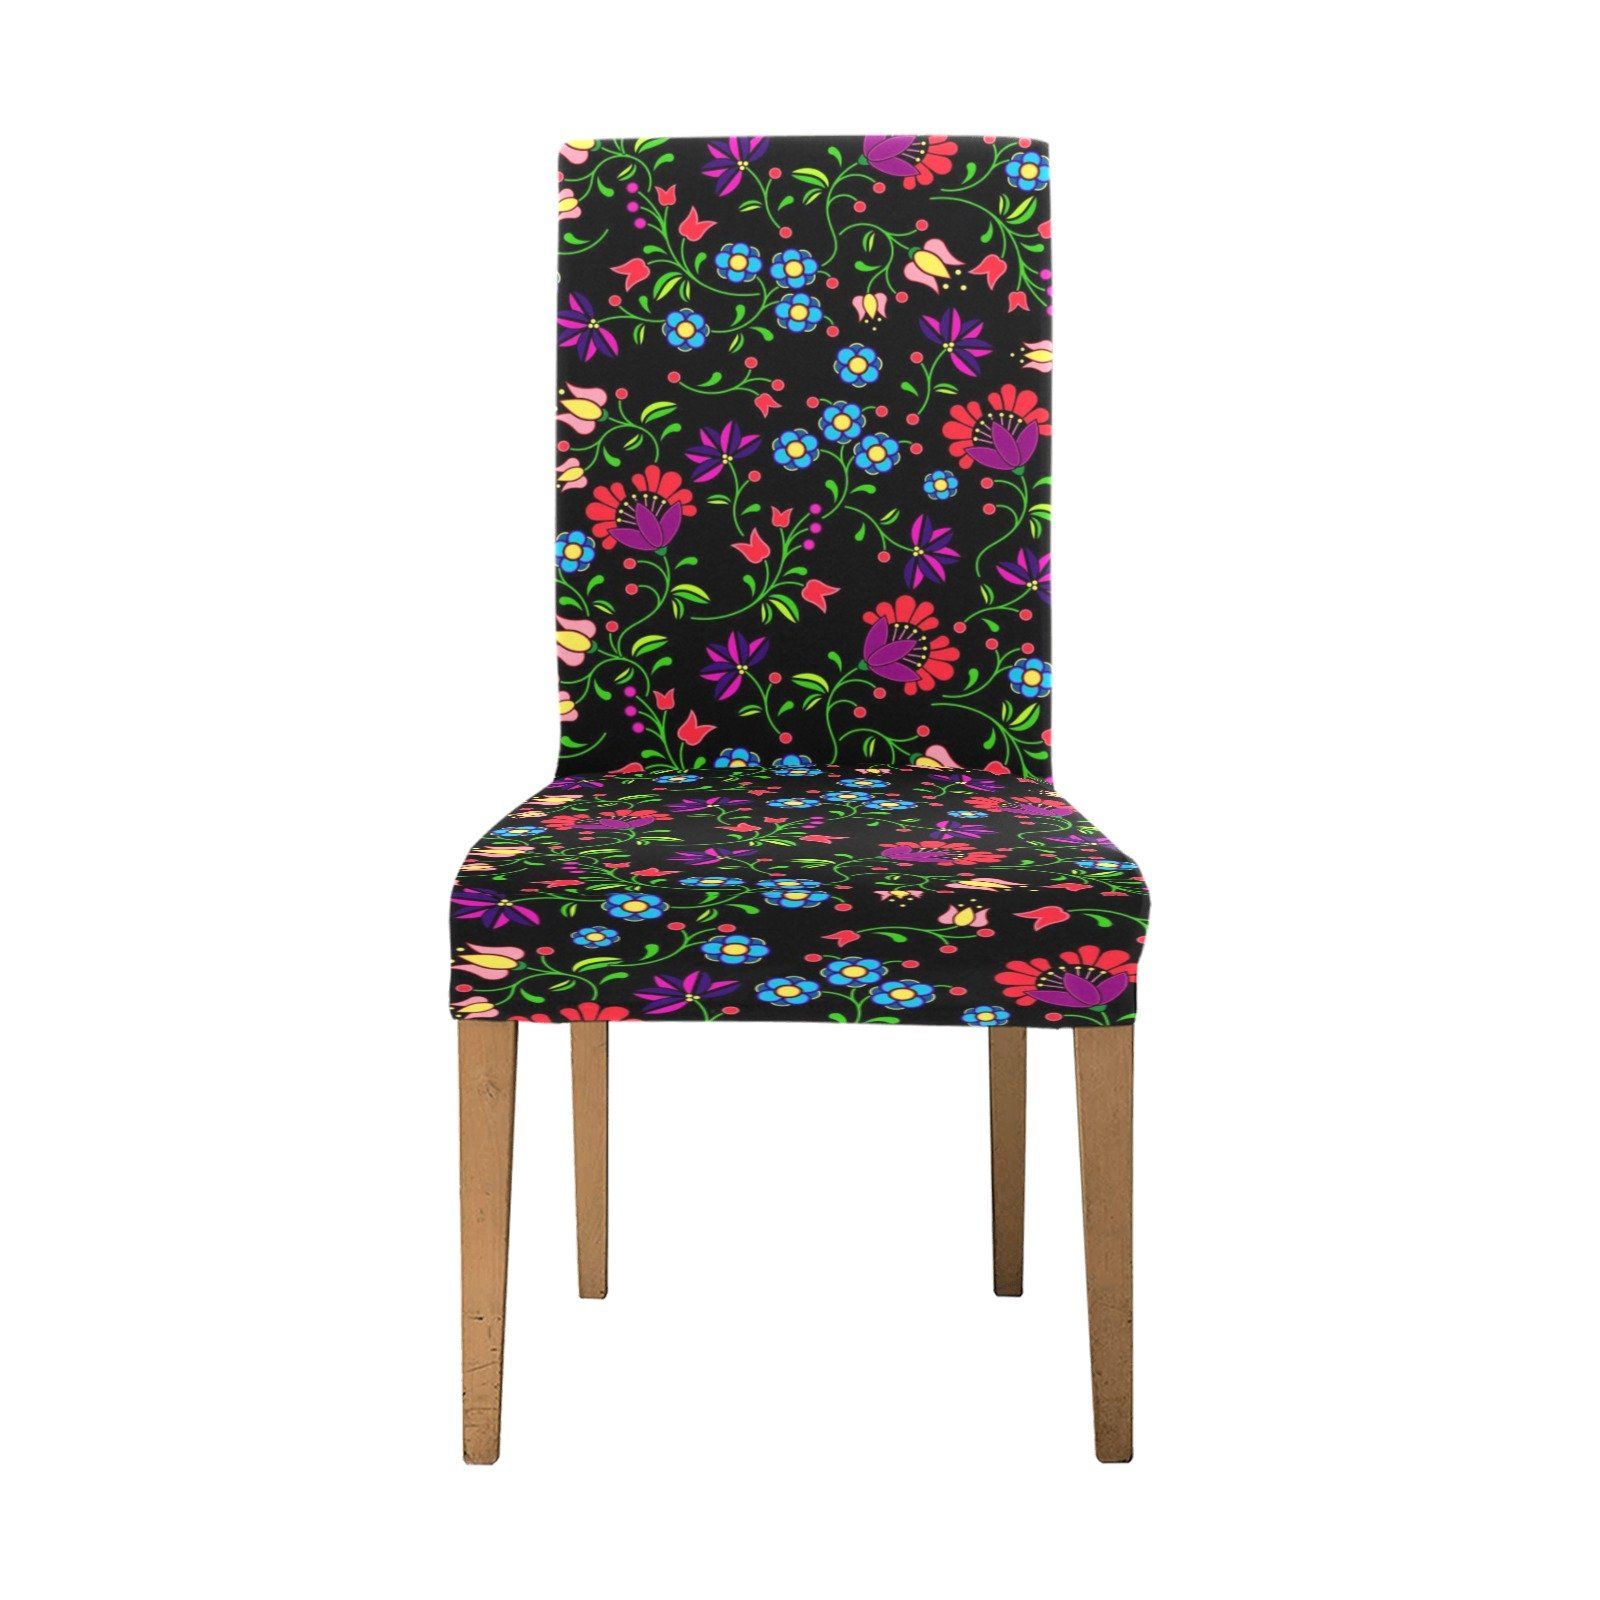 Fleur Indigine Chair Cover (Pack of 4) Chair Cover (Pack of 4) e-joyer 